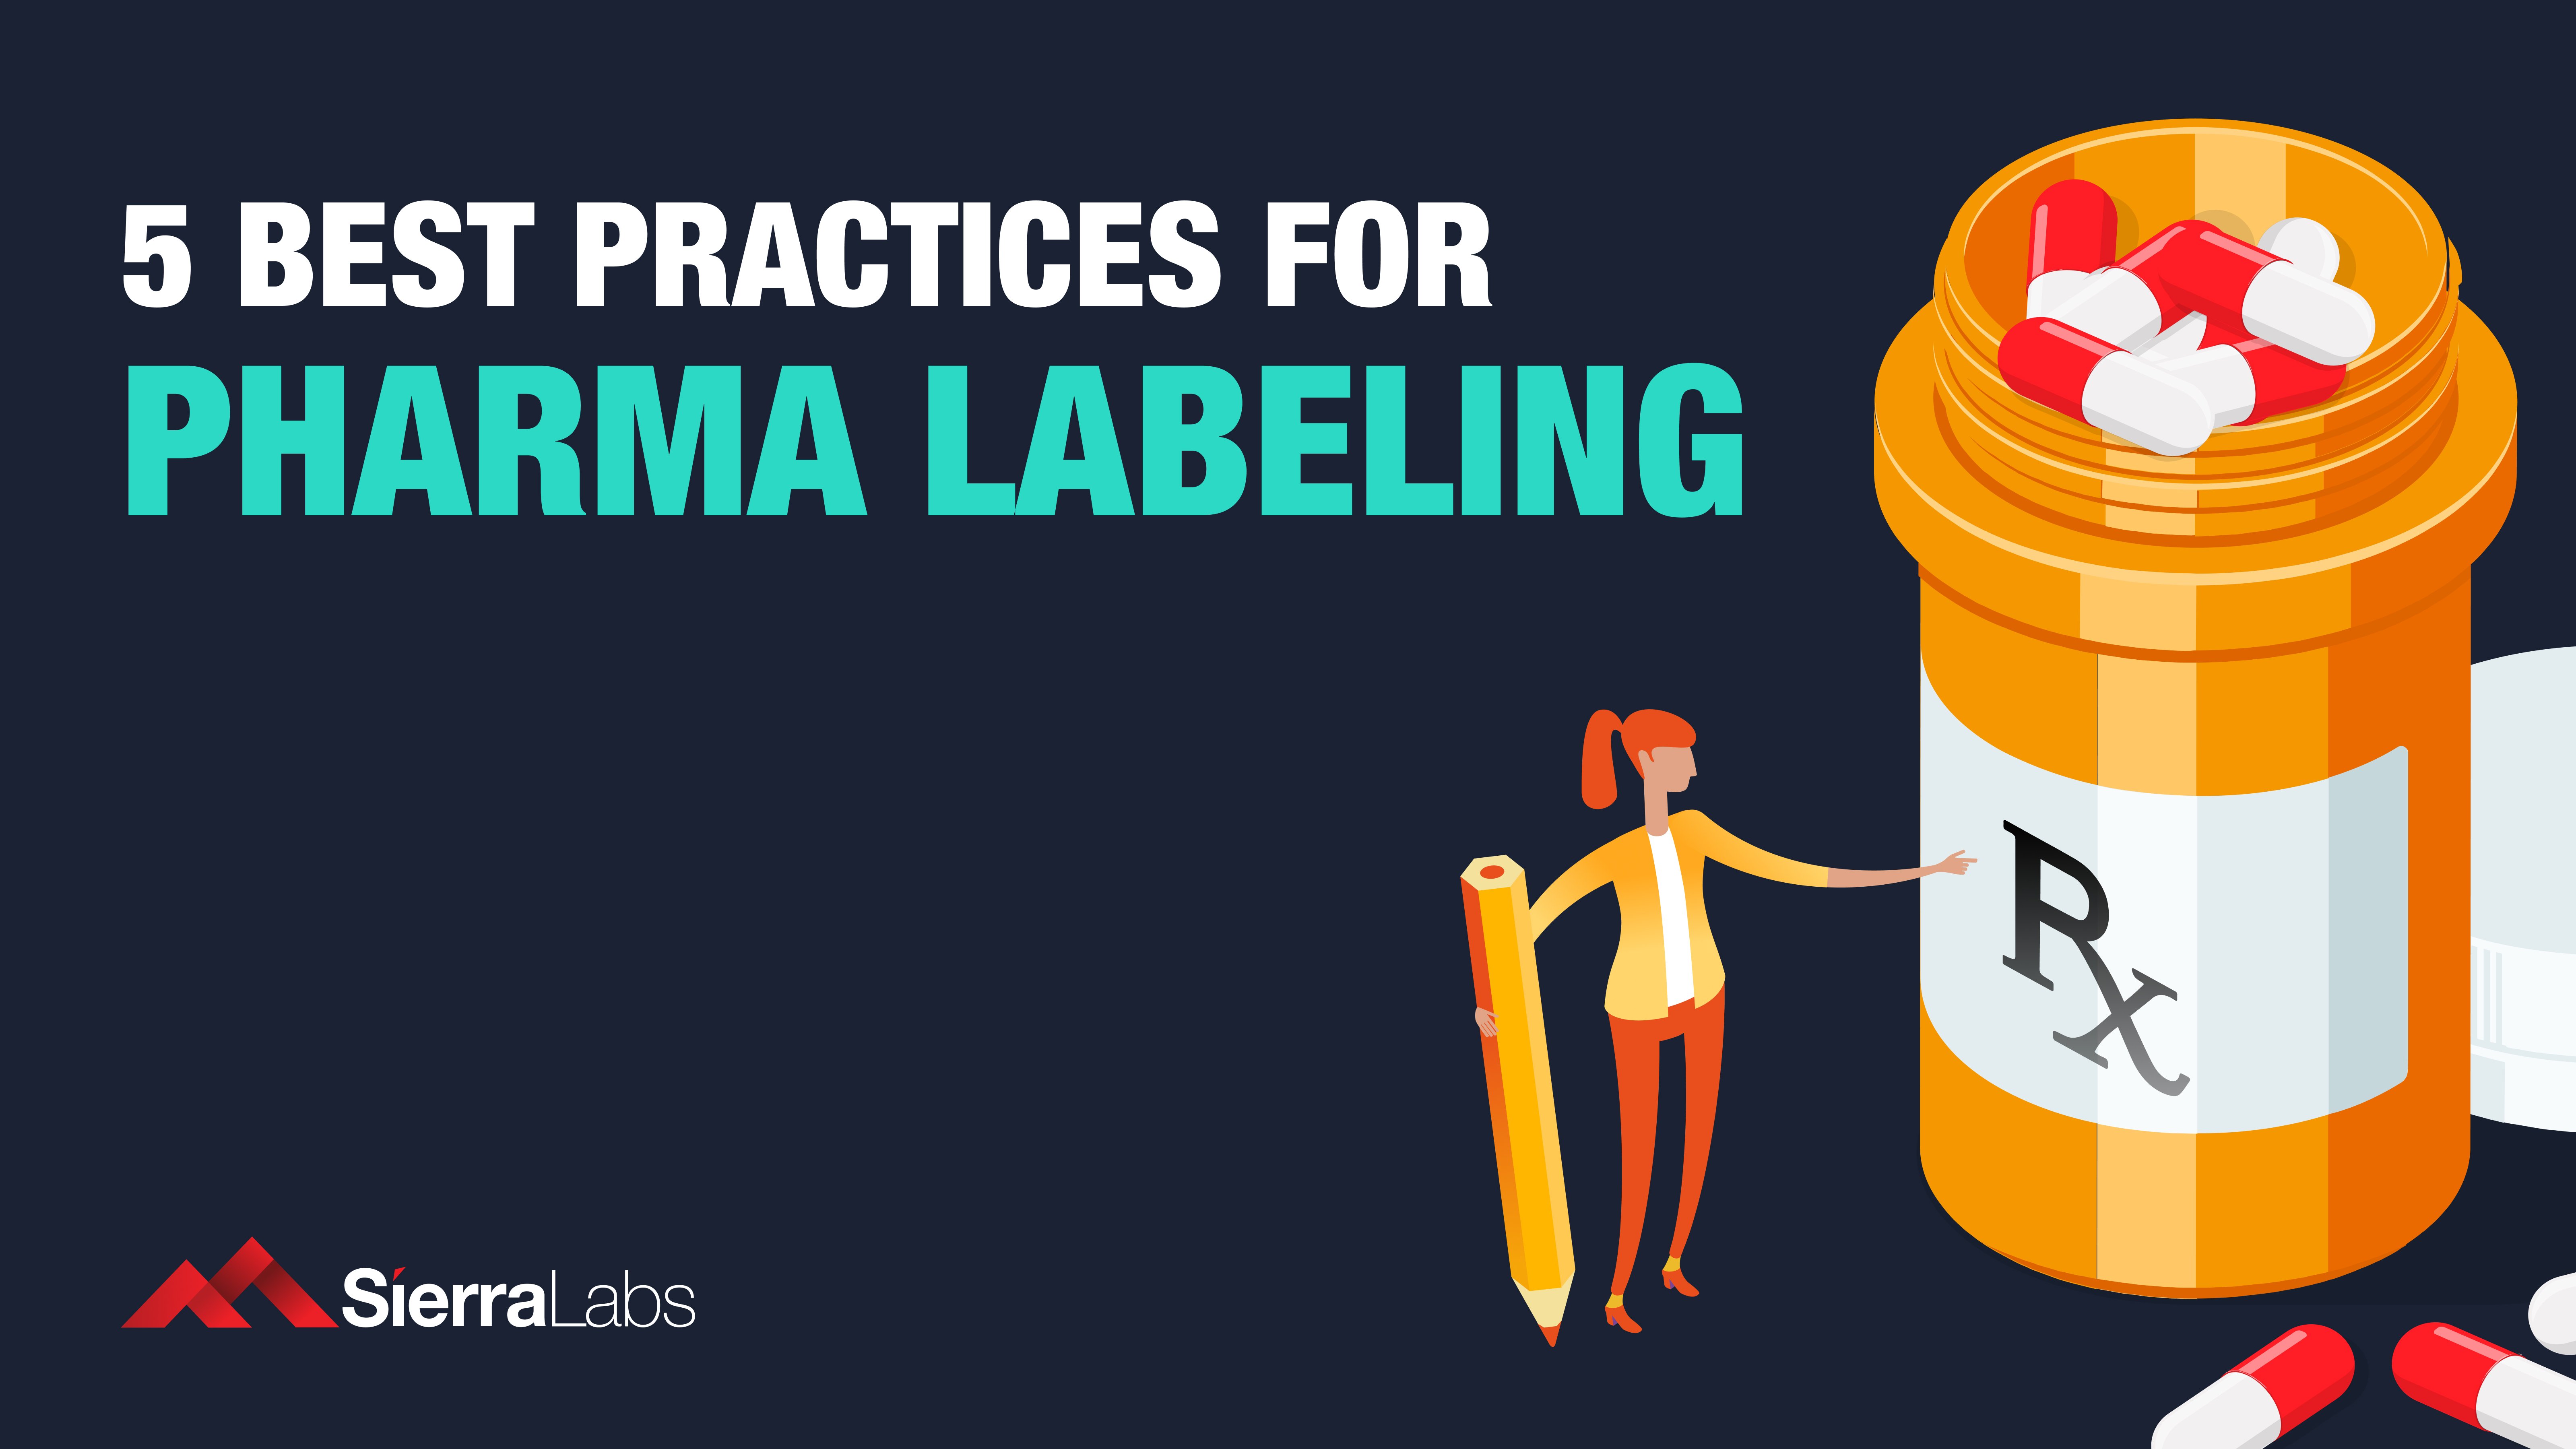 5 Best Practices for Pharma Labeling